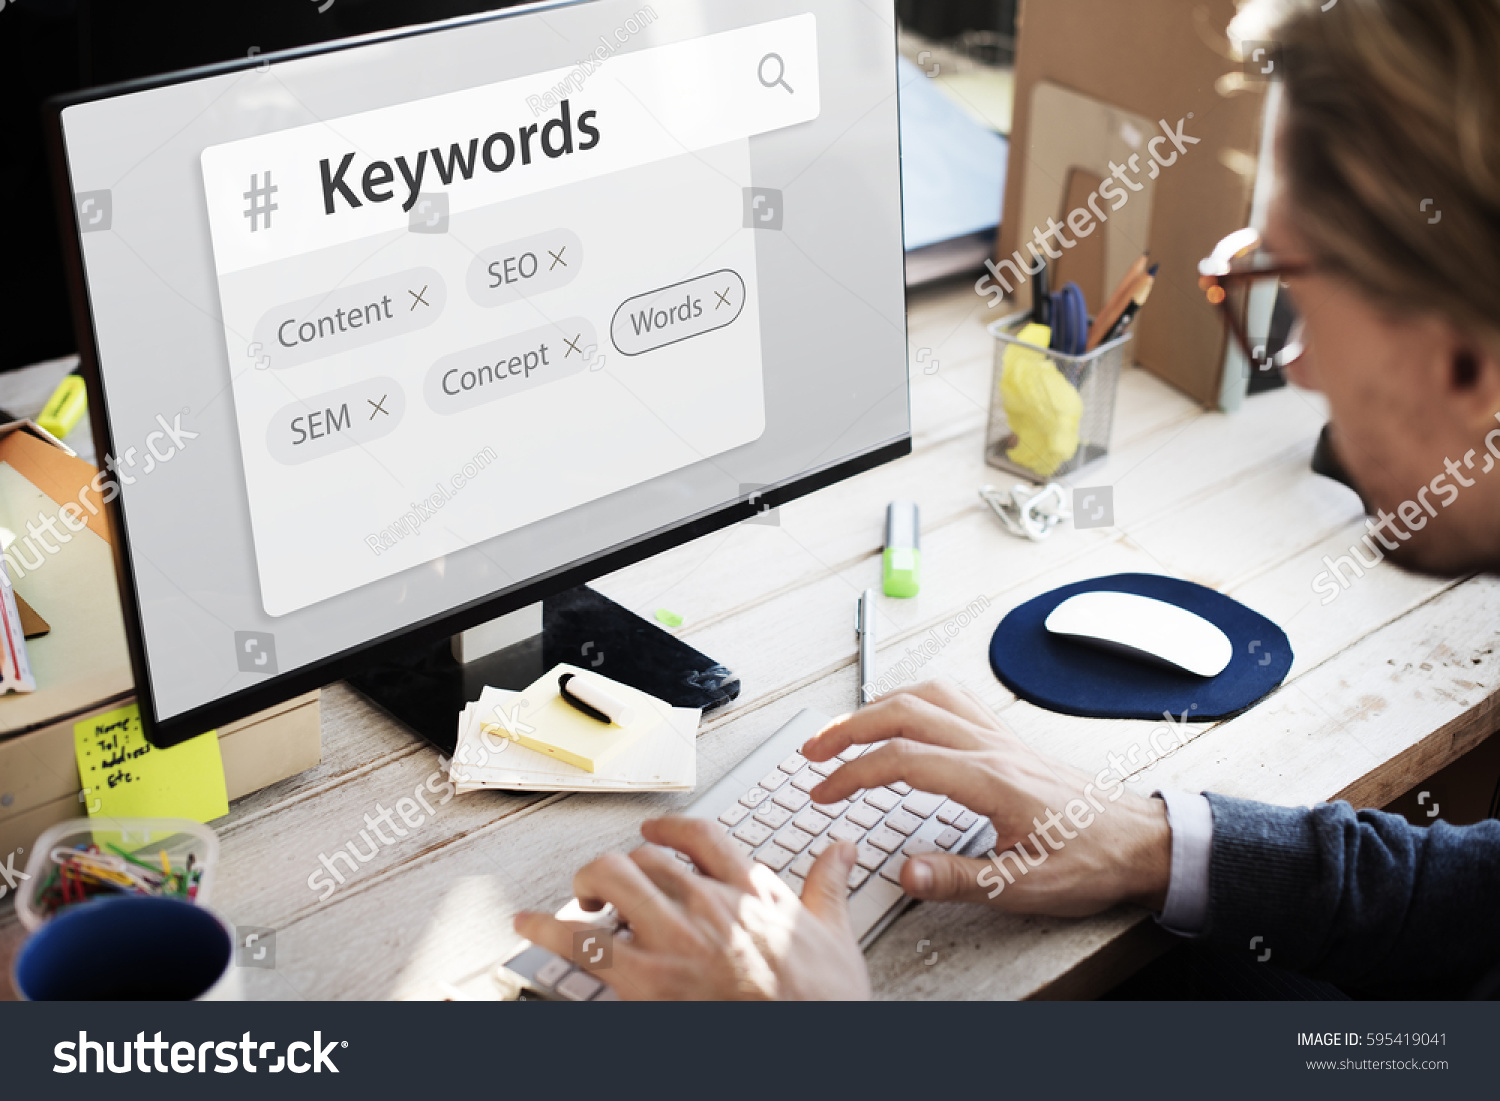 Keyword seo content website tags search #595419041